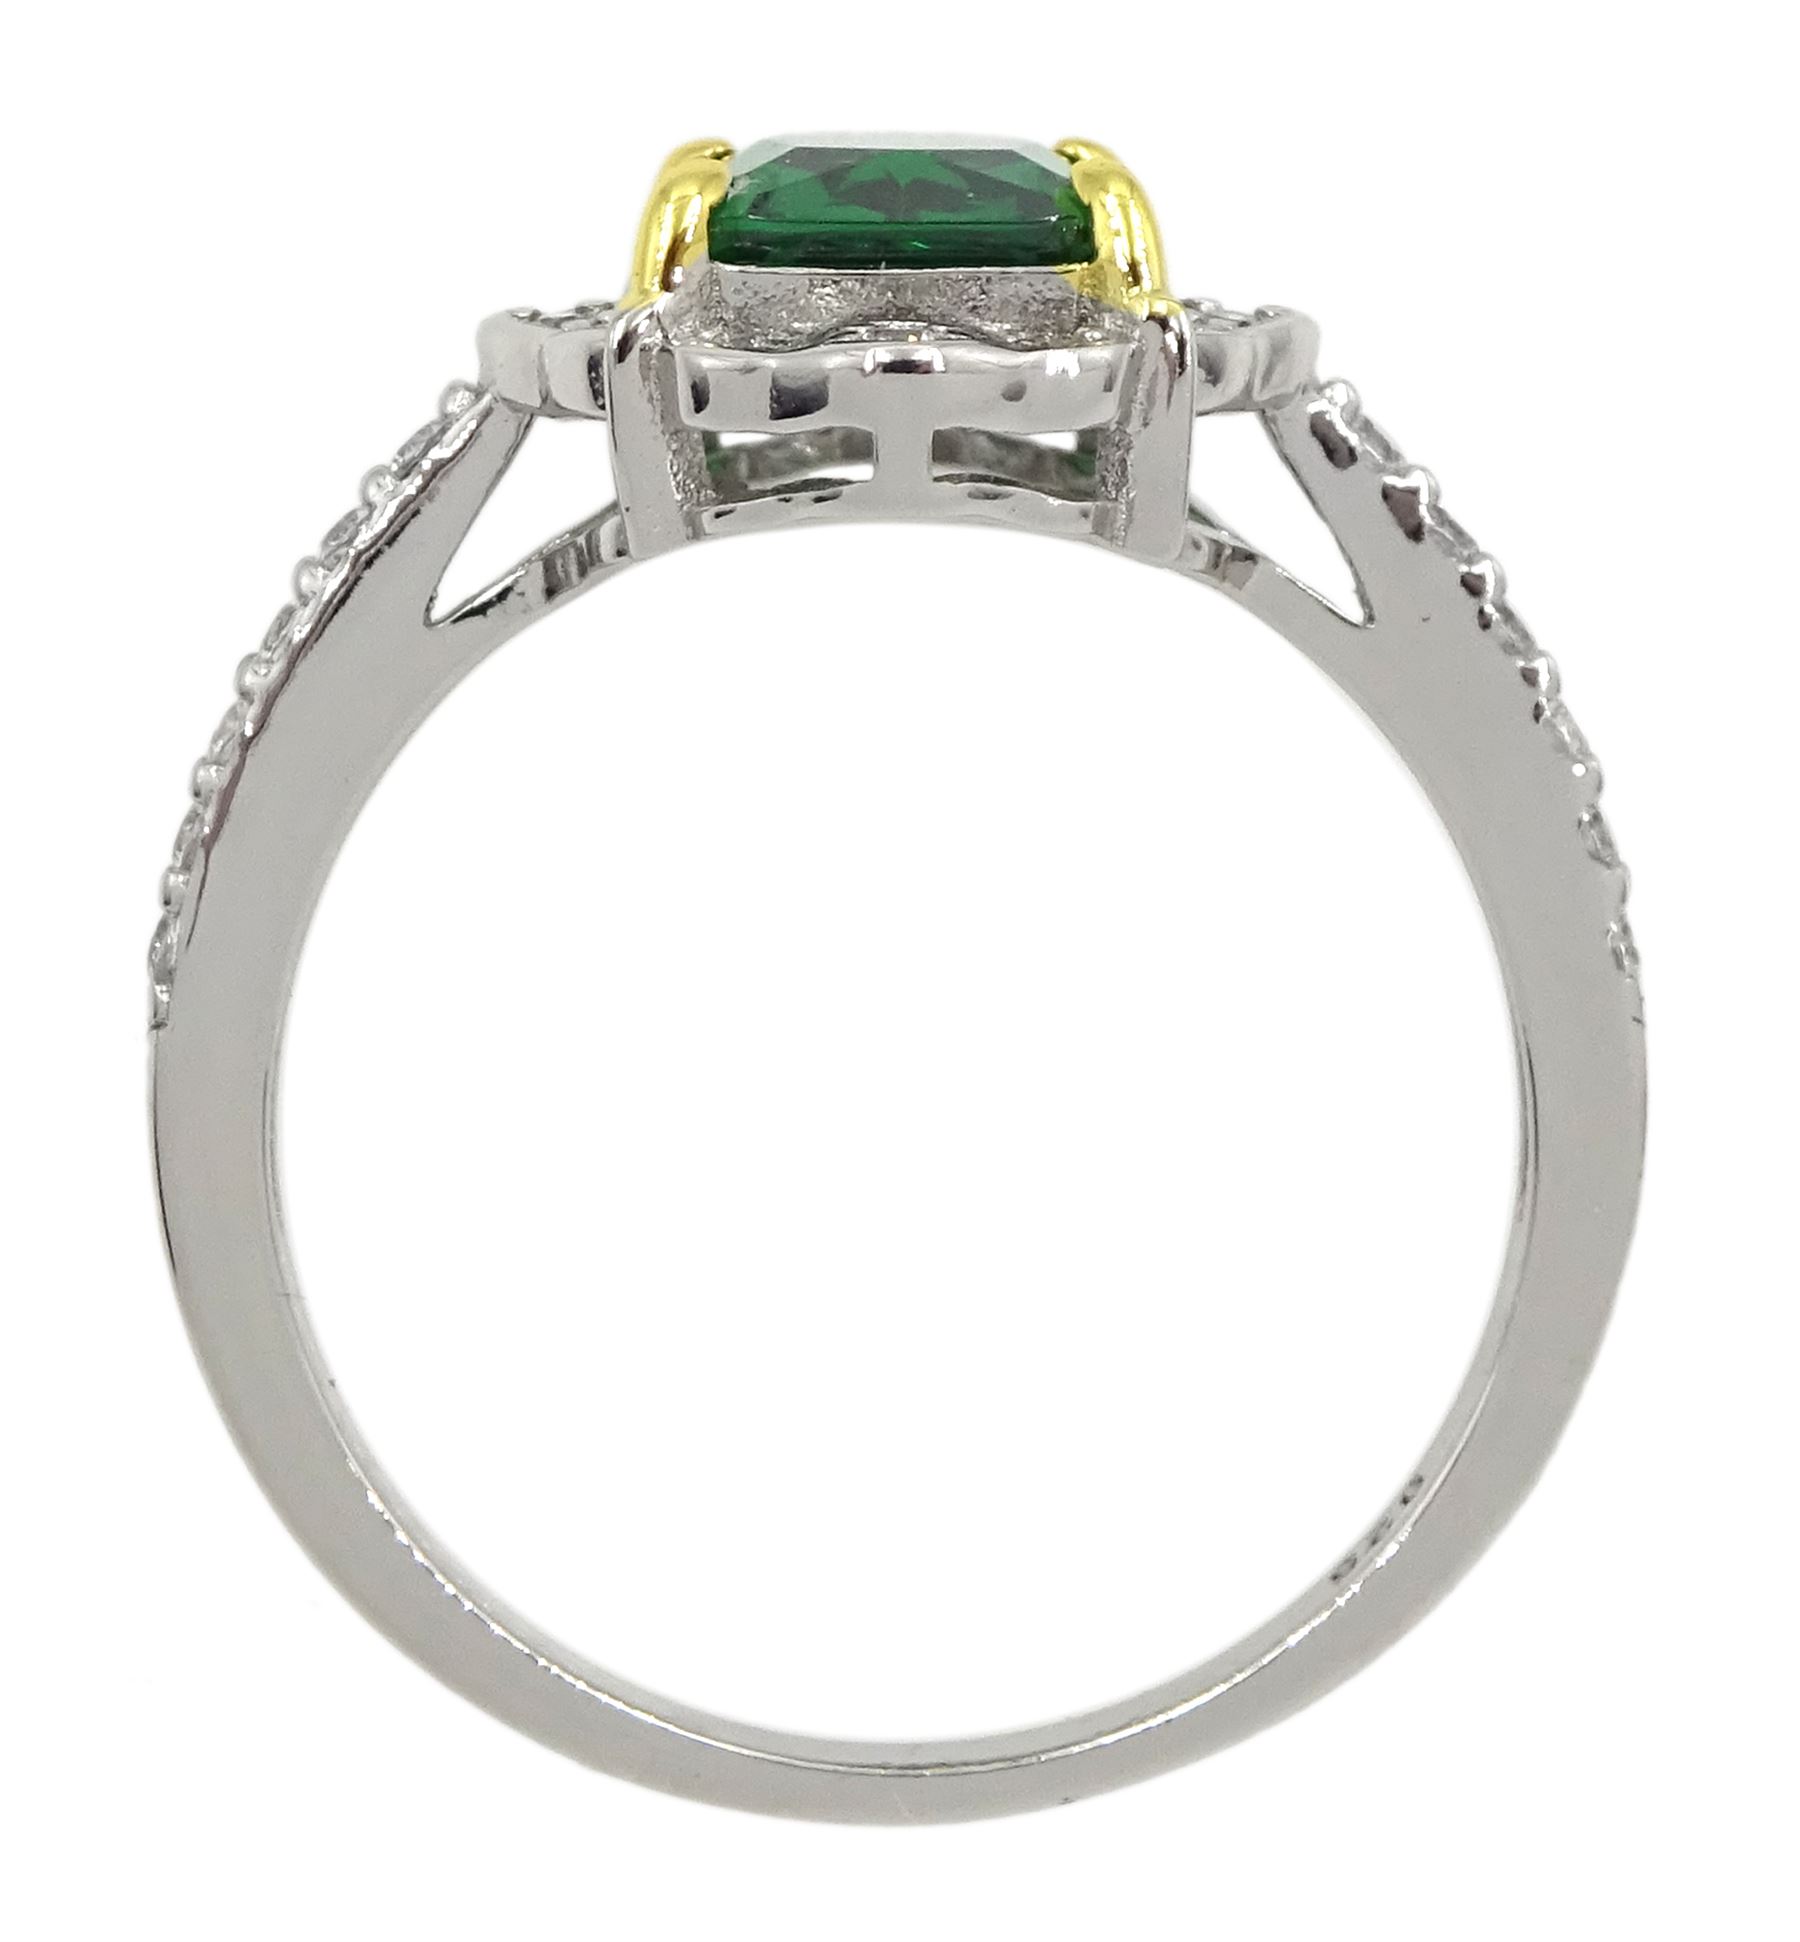 Silver green stone and cubic zirconia cluster ring - Image 4 of 4